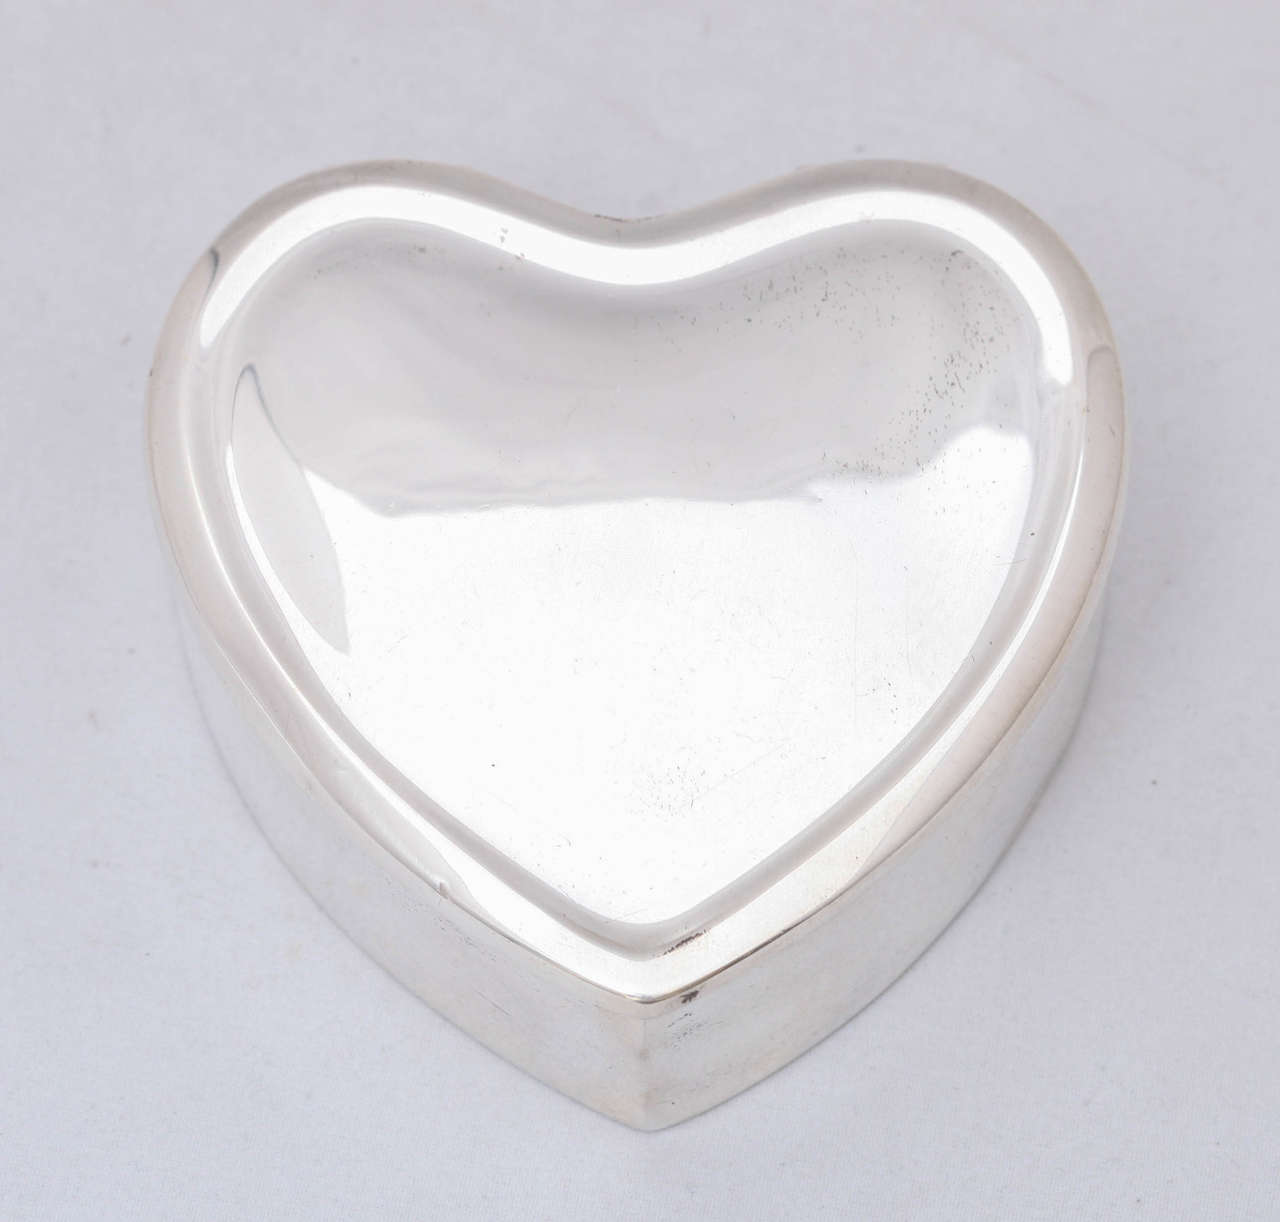 American Edwardian Sterling Silver, Heart-Form Jewelry or Trinkets Box with Hinged LId